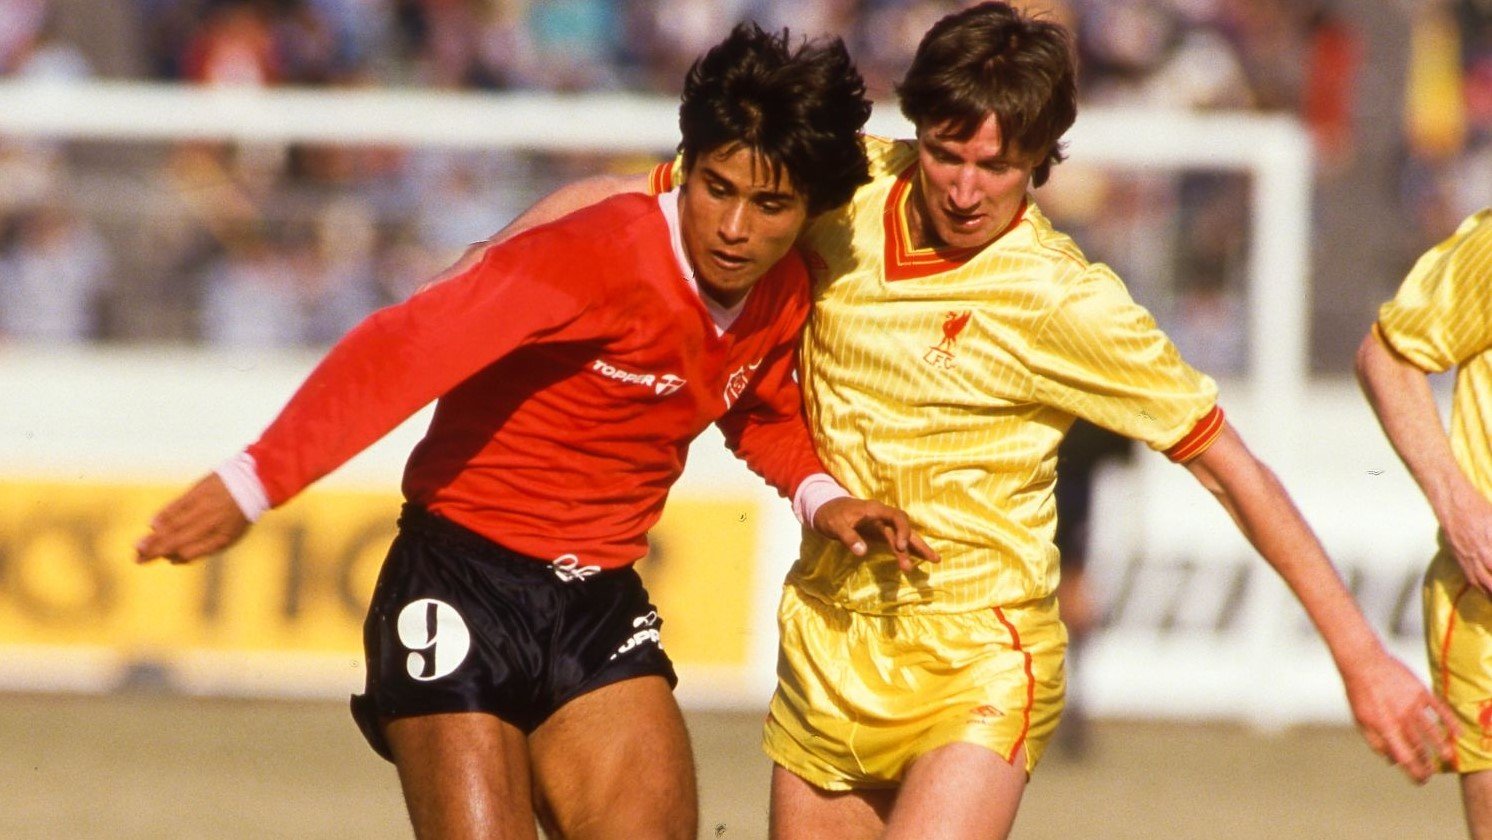 Jose PERCUDANI of Independiente and Steve NICOL of Liverpool during the Intercontinental Cup, Toyota Cup match between Liverpool and Independiente at National Stadium, Tokyo, Japan on 9 December 1984 ( Photo by Alain de Martignac / Onze / Icon Sport )